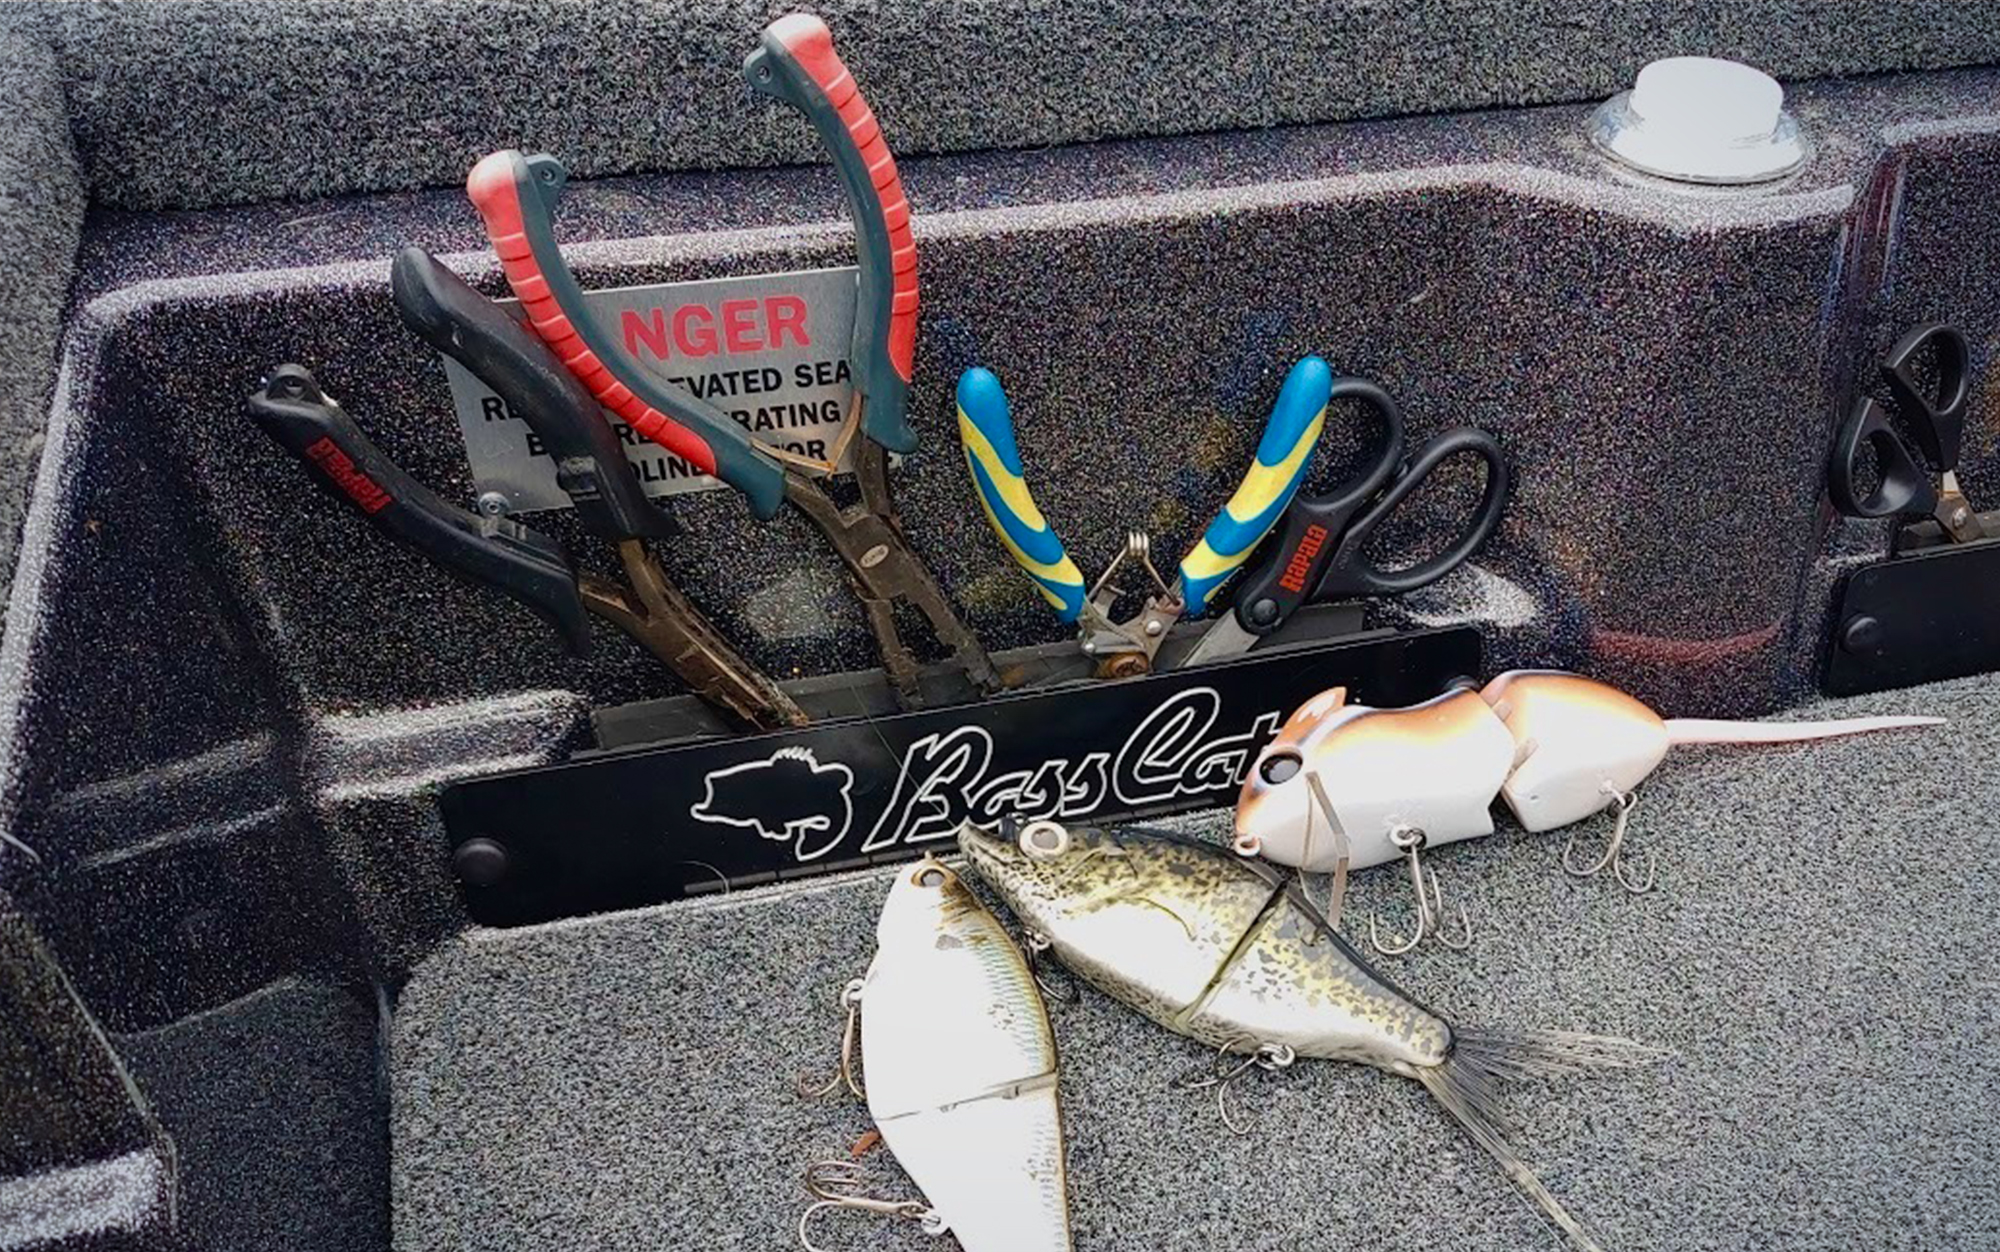 A designated storage space for the best fishing pliers will ensures they're always at the ready.